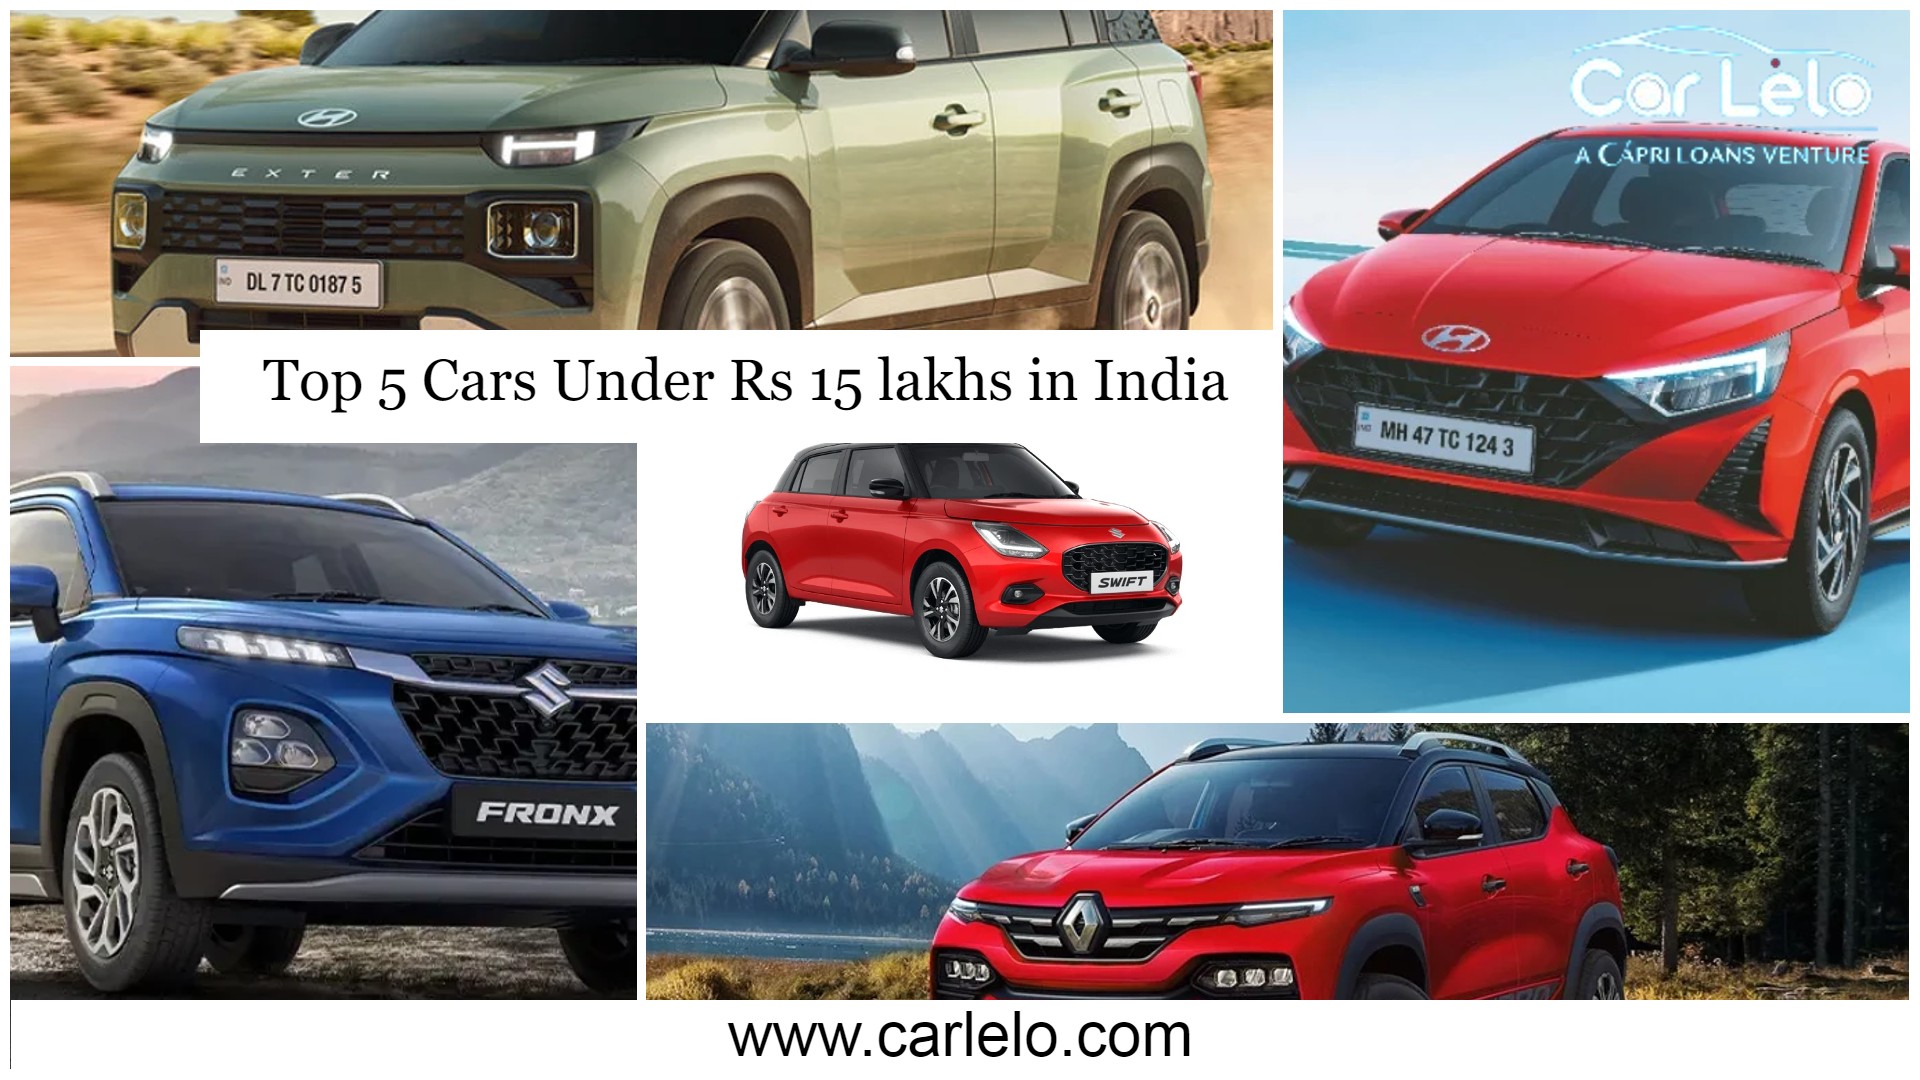 Top 5 Cars Under 15 lakhs in India - New Car Launch